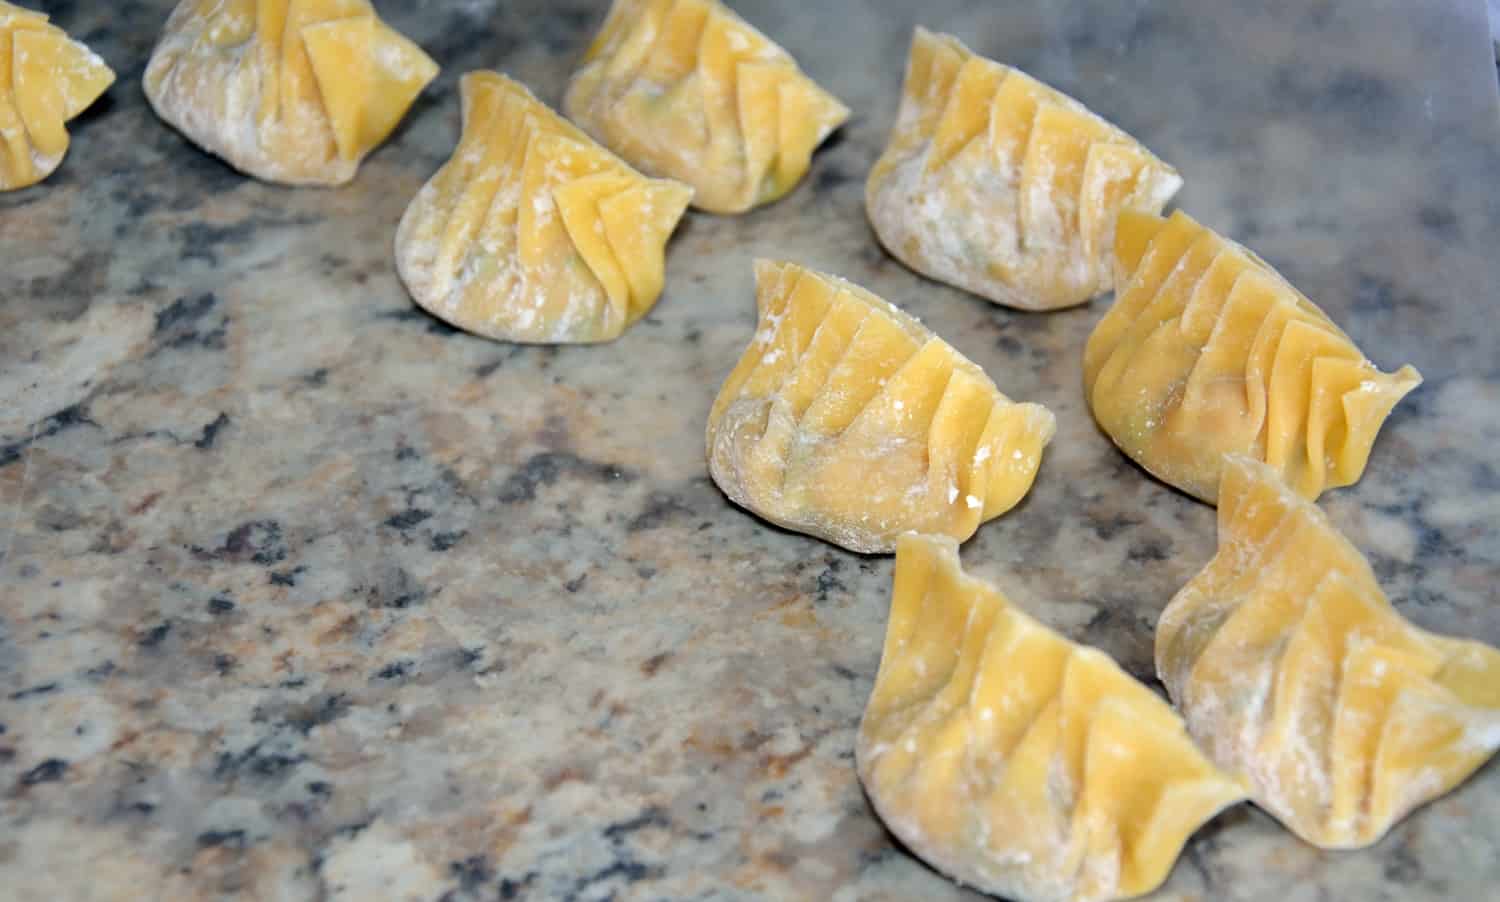 Authentic Homemade Dumplings (Potstickers) recipe! Learn how to make pork and shrimp dumplings using a real Chinese restaurant recipe! Plus a tutorial on how to fold a dumpling and dumplings dipping sauce.